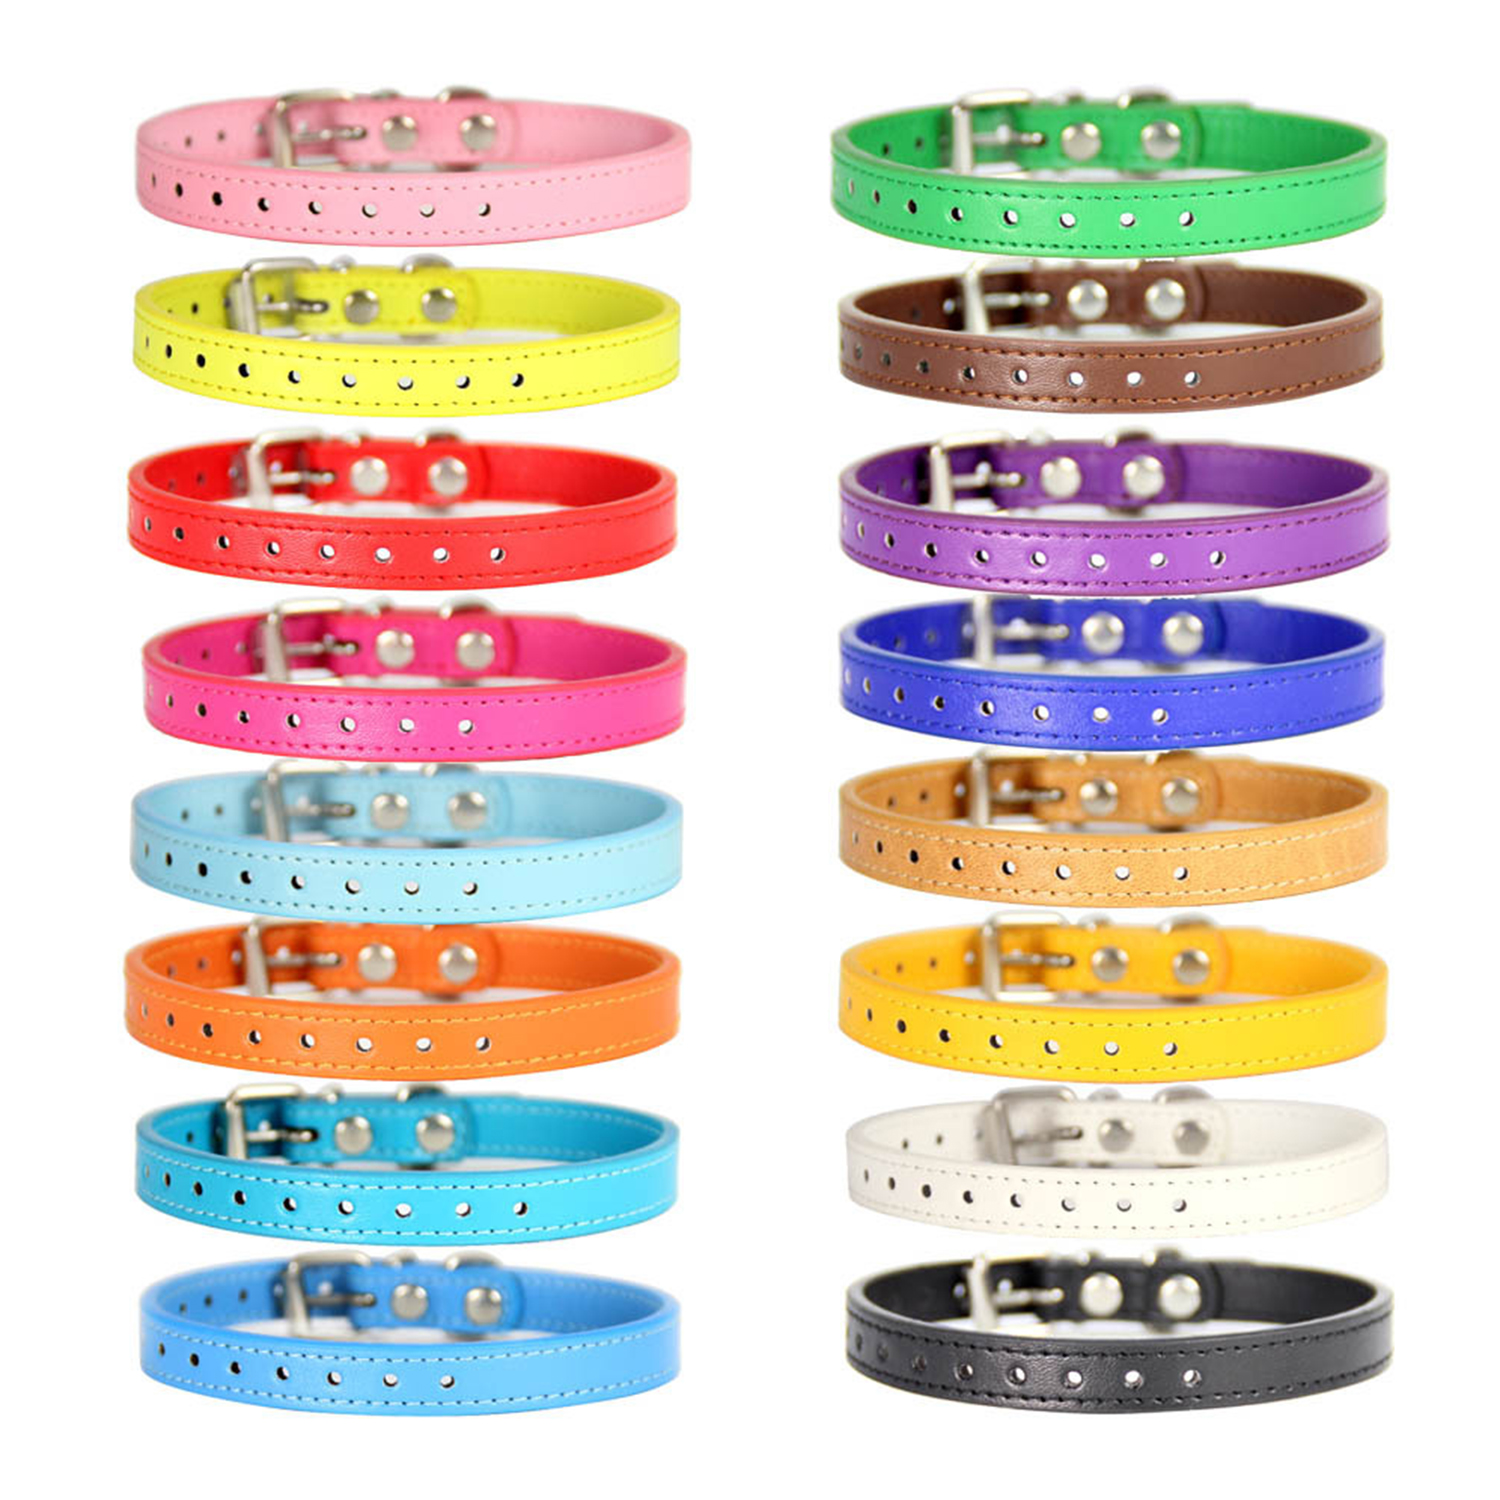 Adjustable Colorful Pet Collars Kitten Cat Collar PU Leather Neck Strap Safe for Dogs Soft Pet Supplies